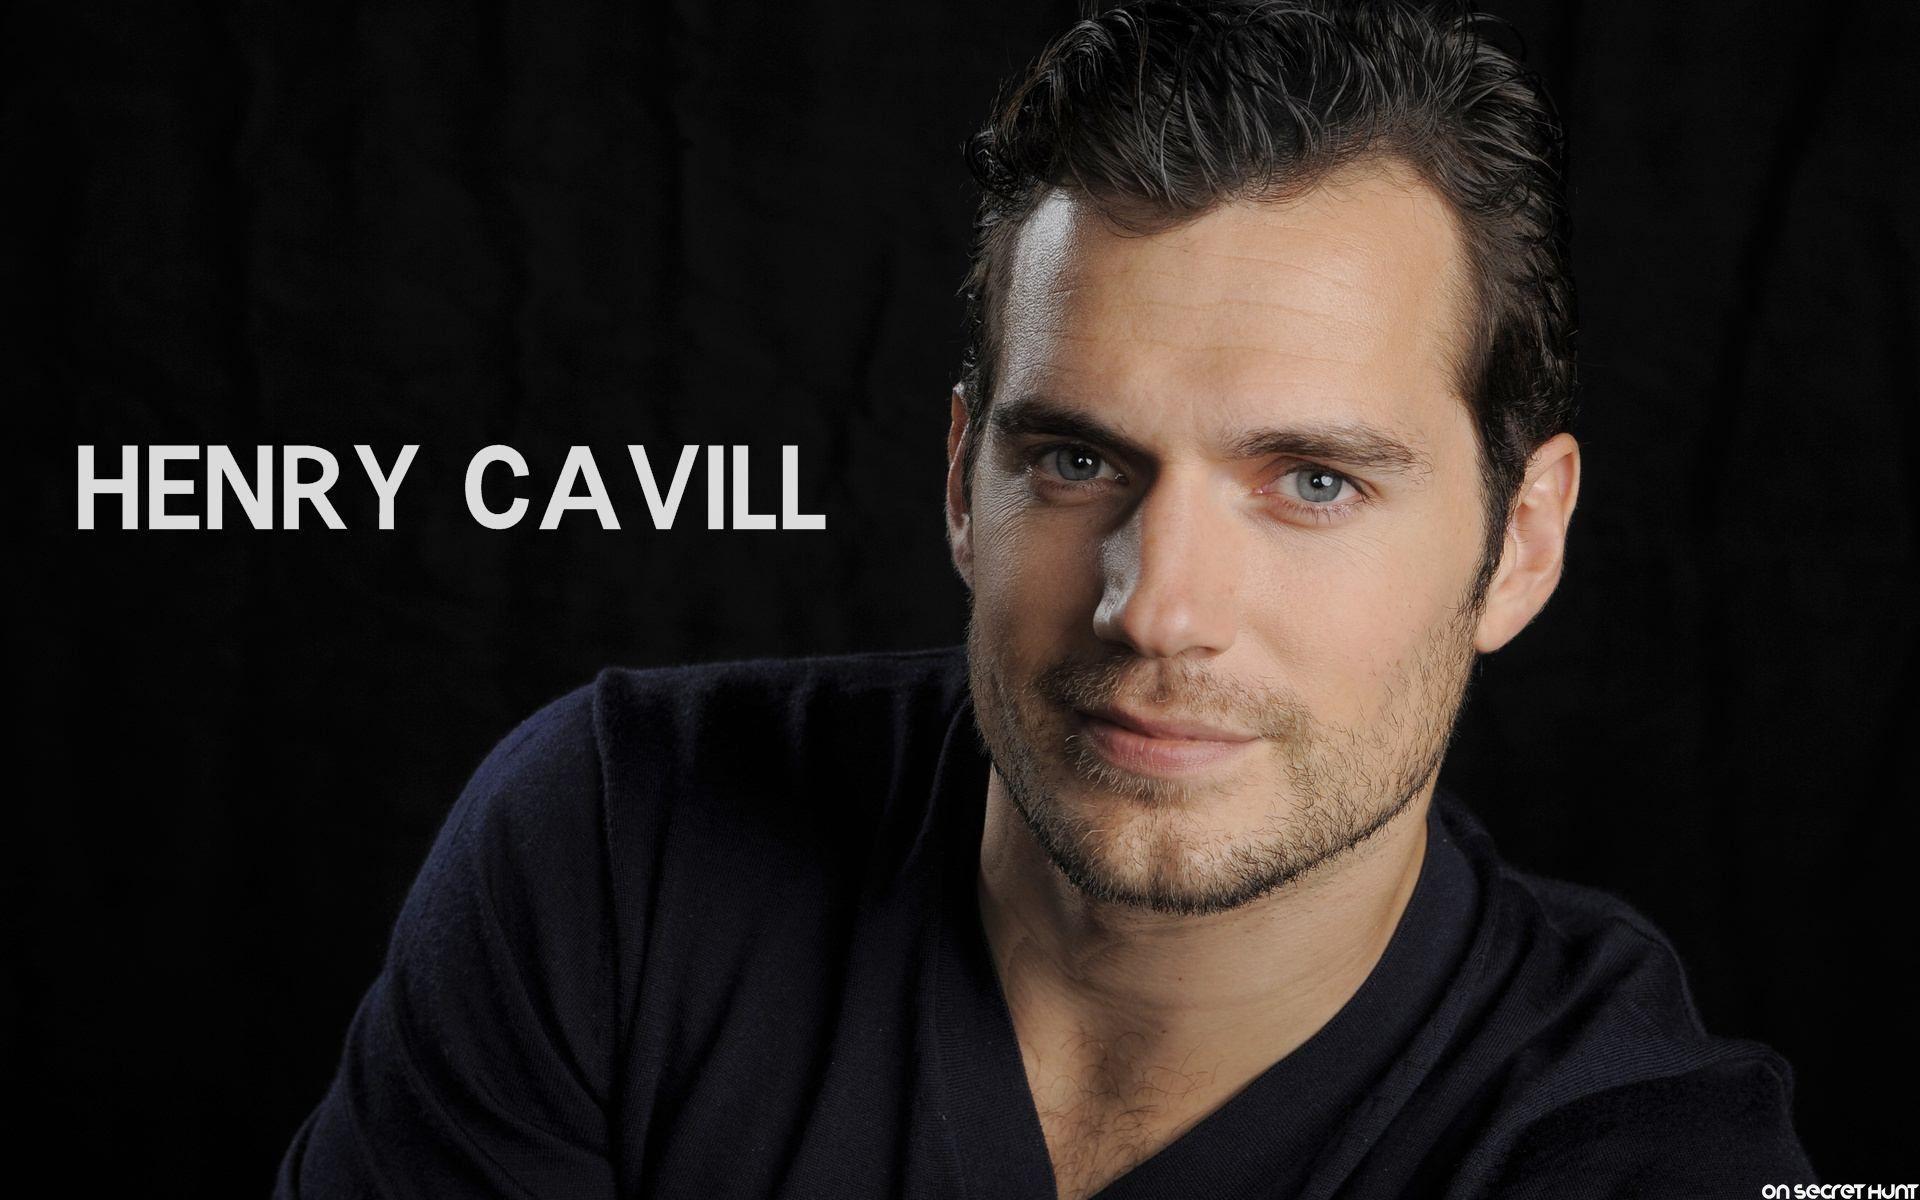 Henry Cavill Wallpapers High Resolution and Quality Download.